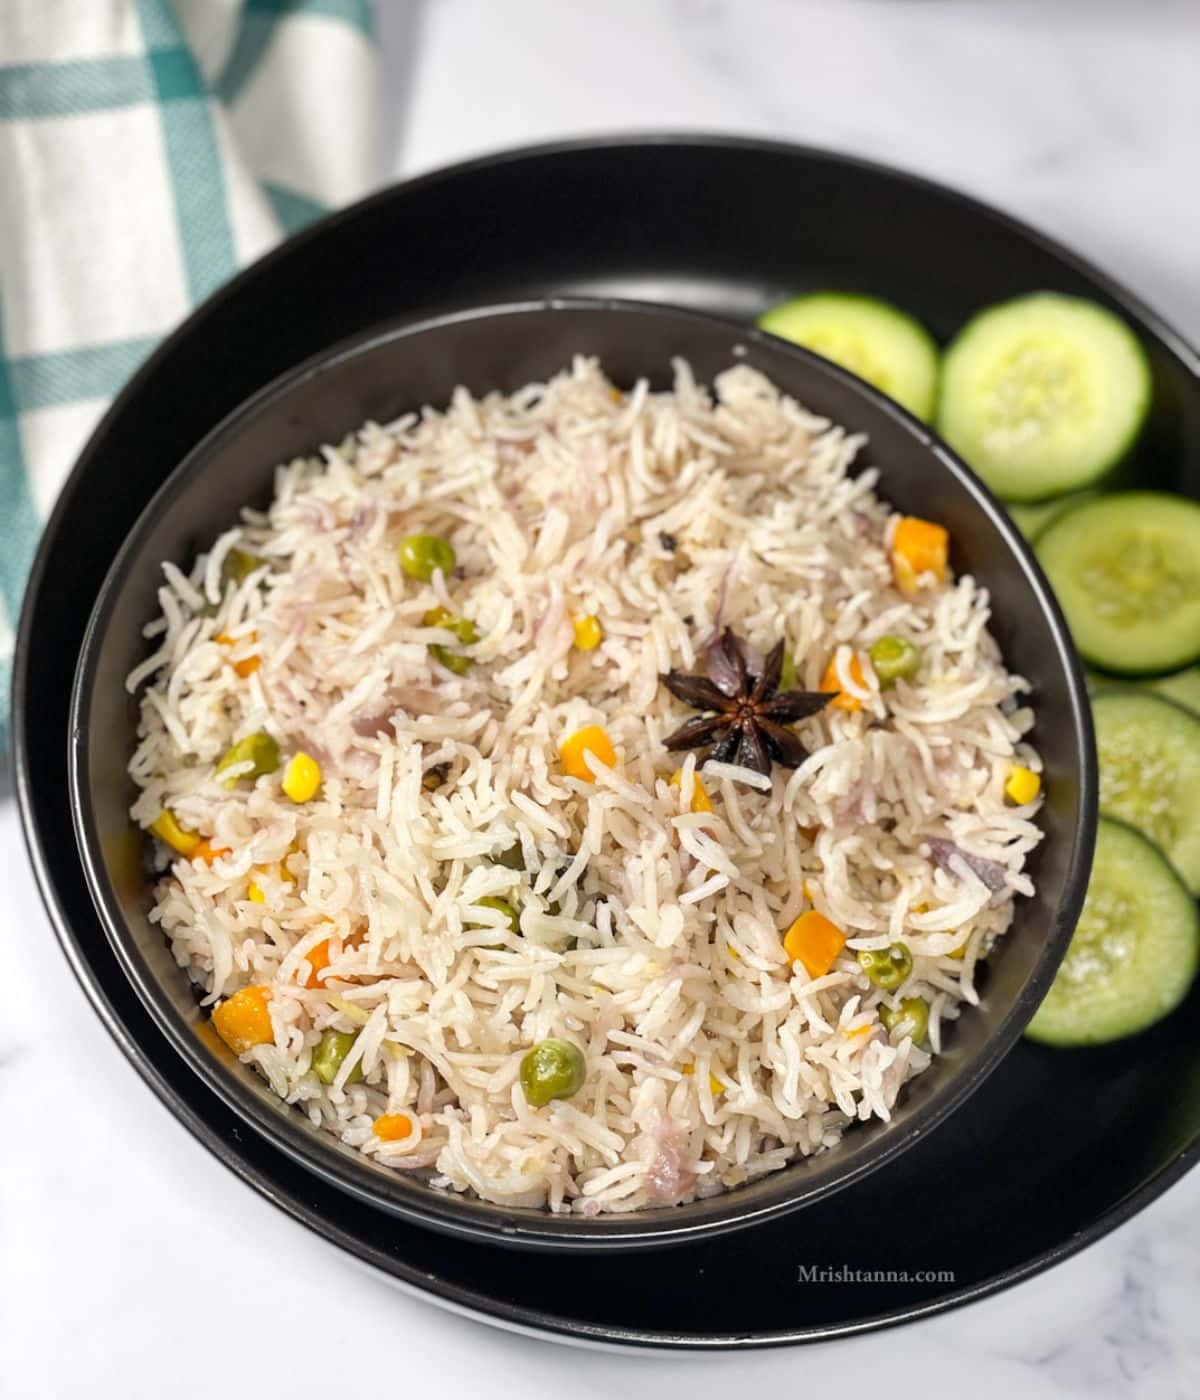 A bowl of vegetable pulao is on the plate along with cucumber slices.